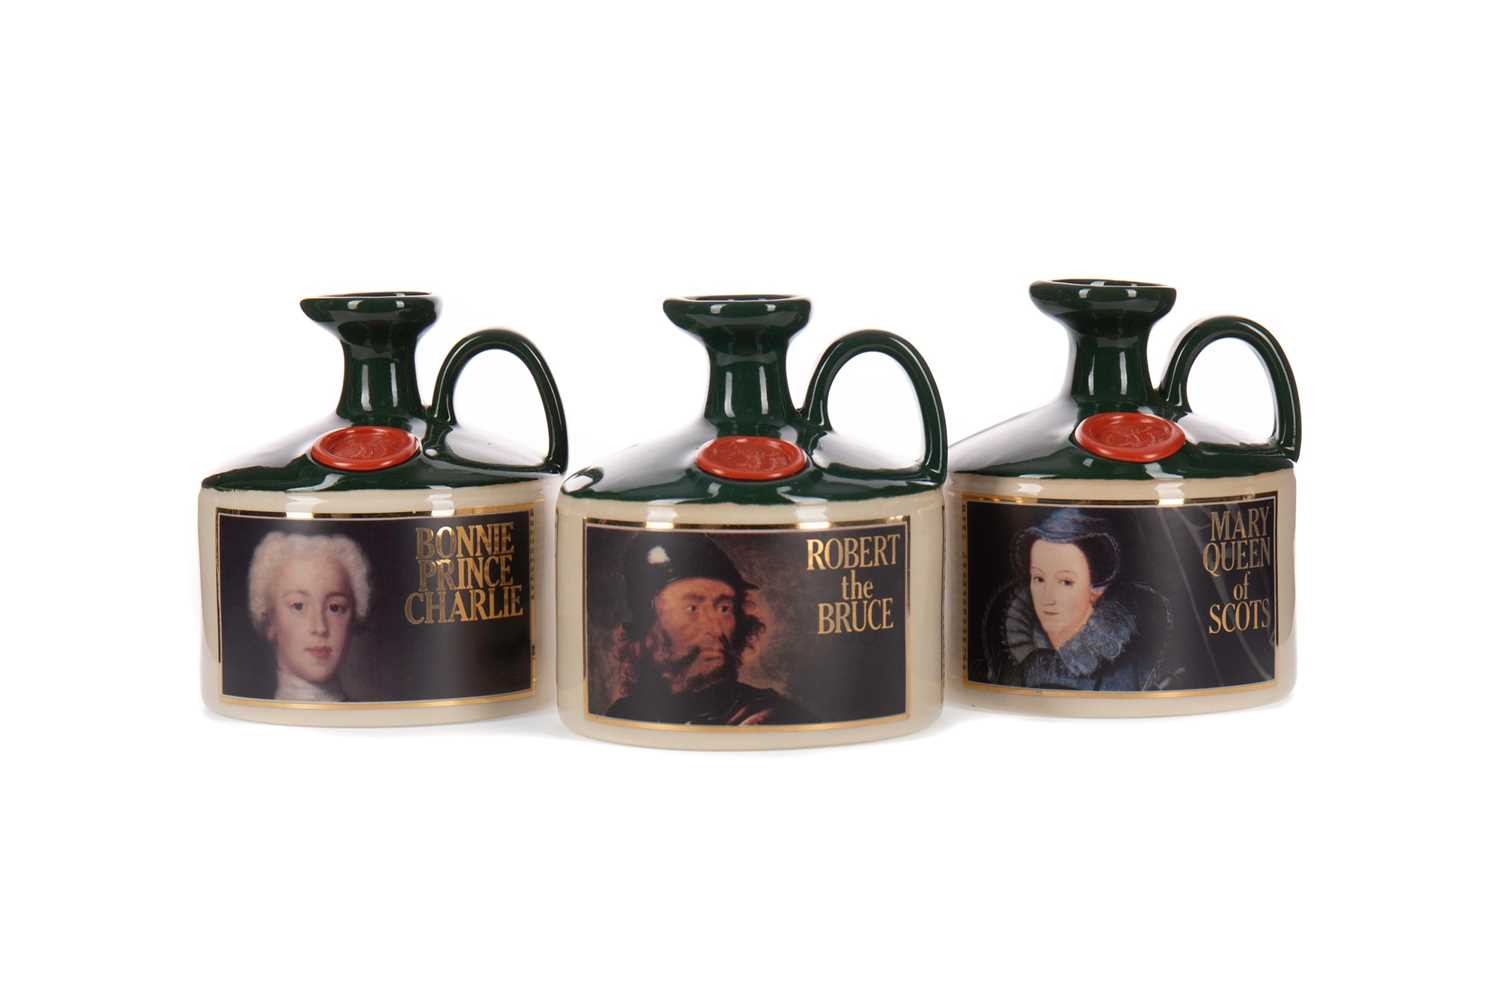 Lot 13 - GLENFIDDICH ROBERT THE BRUCE, MARY QUEEN OF SCOTS AND CHARLES EDWARD STUART CROCKS